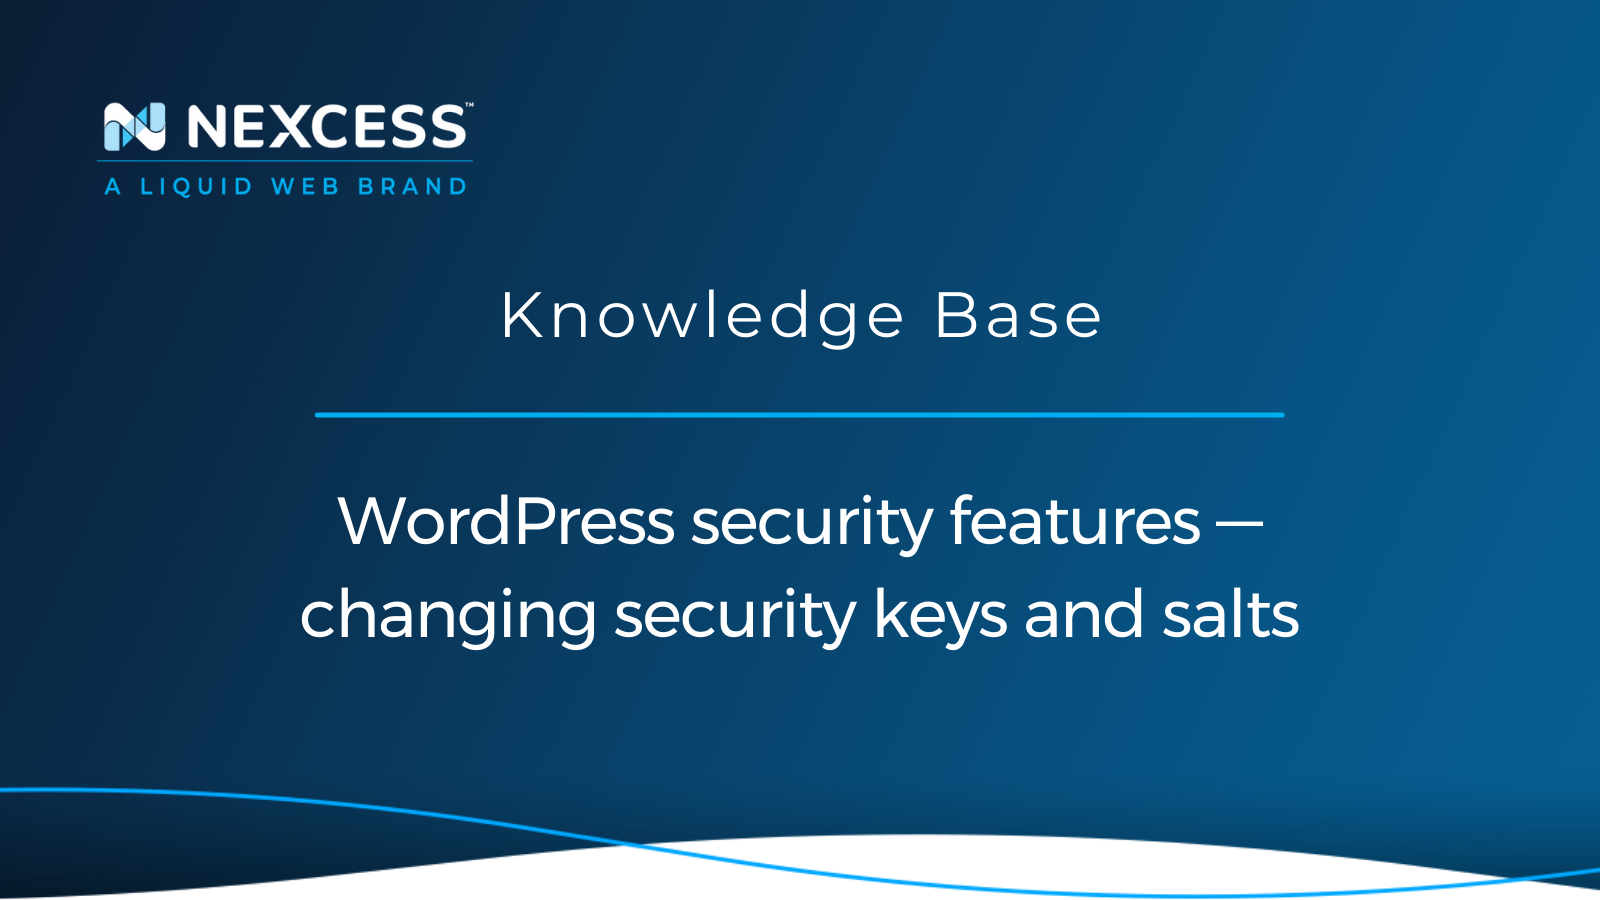 WordPress security features — changing security keys and salts